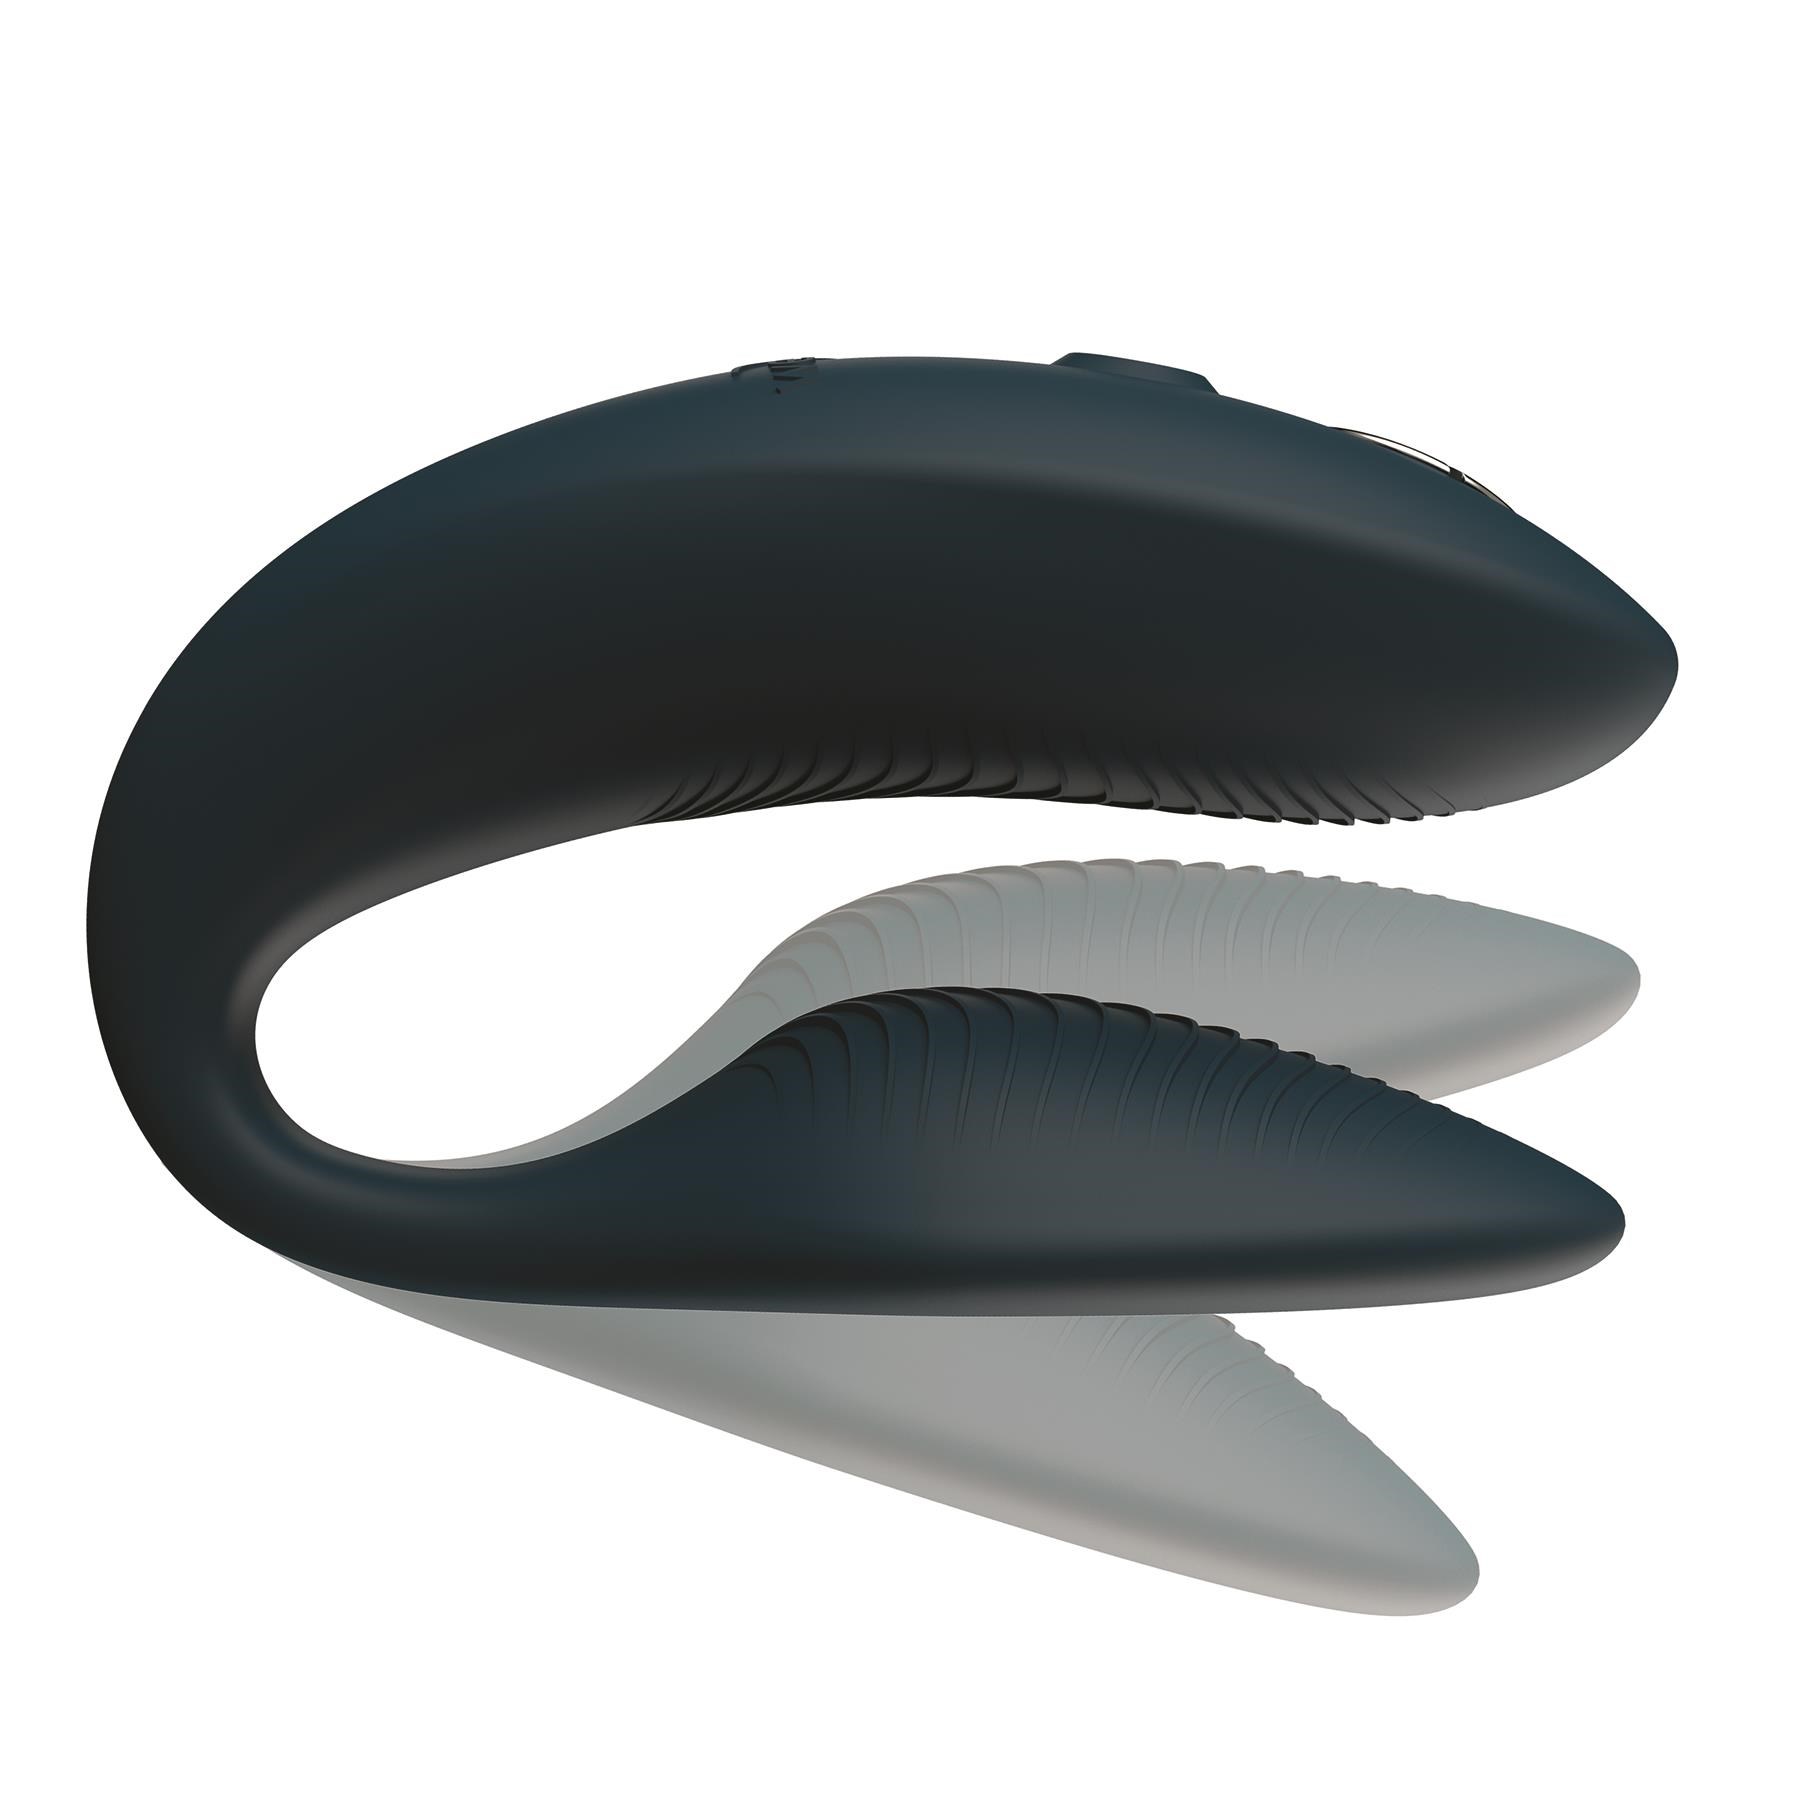 We-Vibe Sync 2 Couples Massager - Showing Flexibility